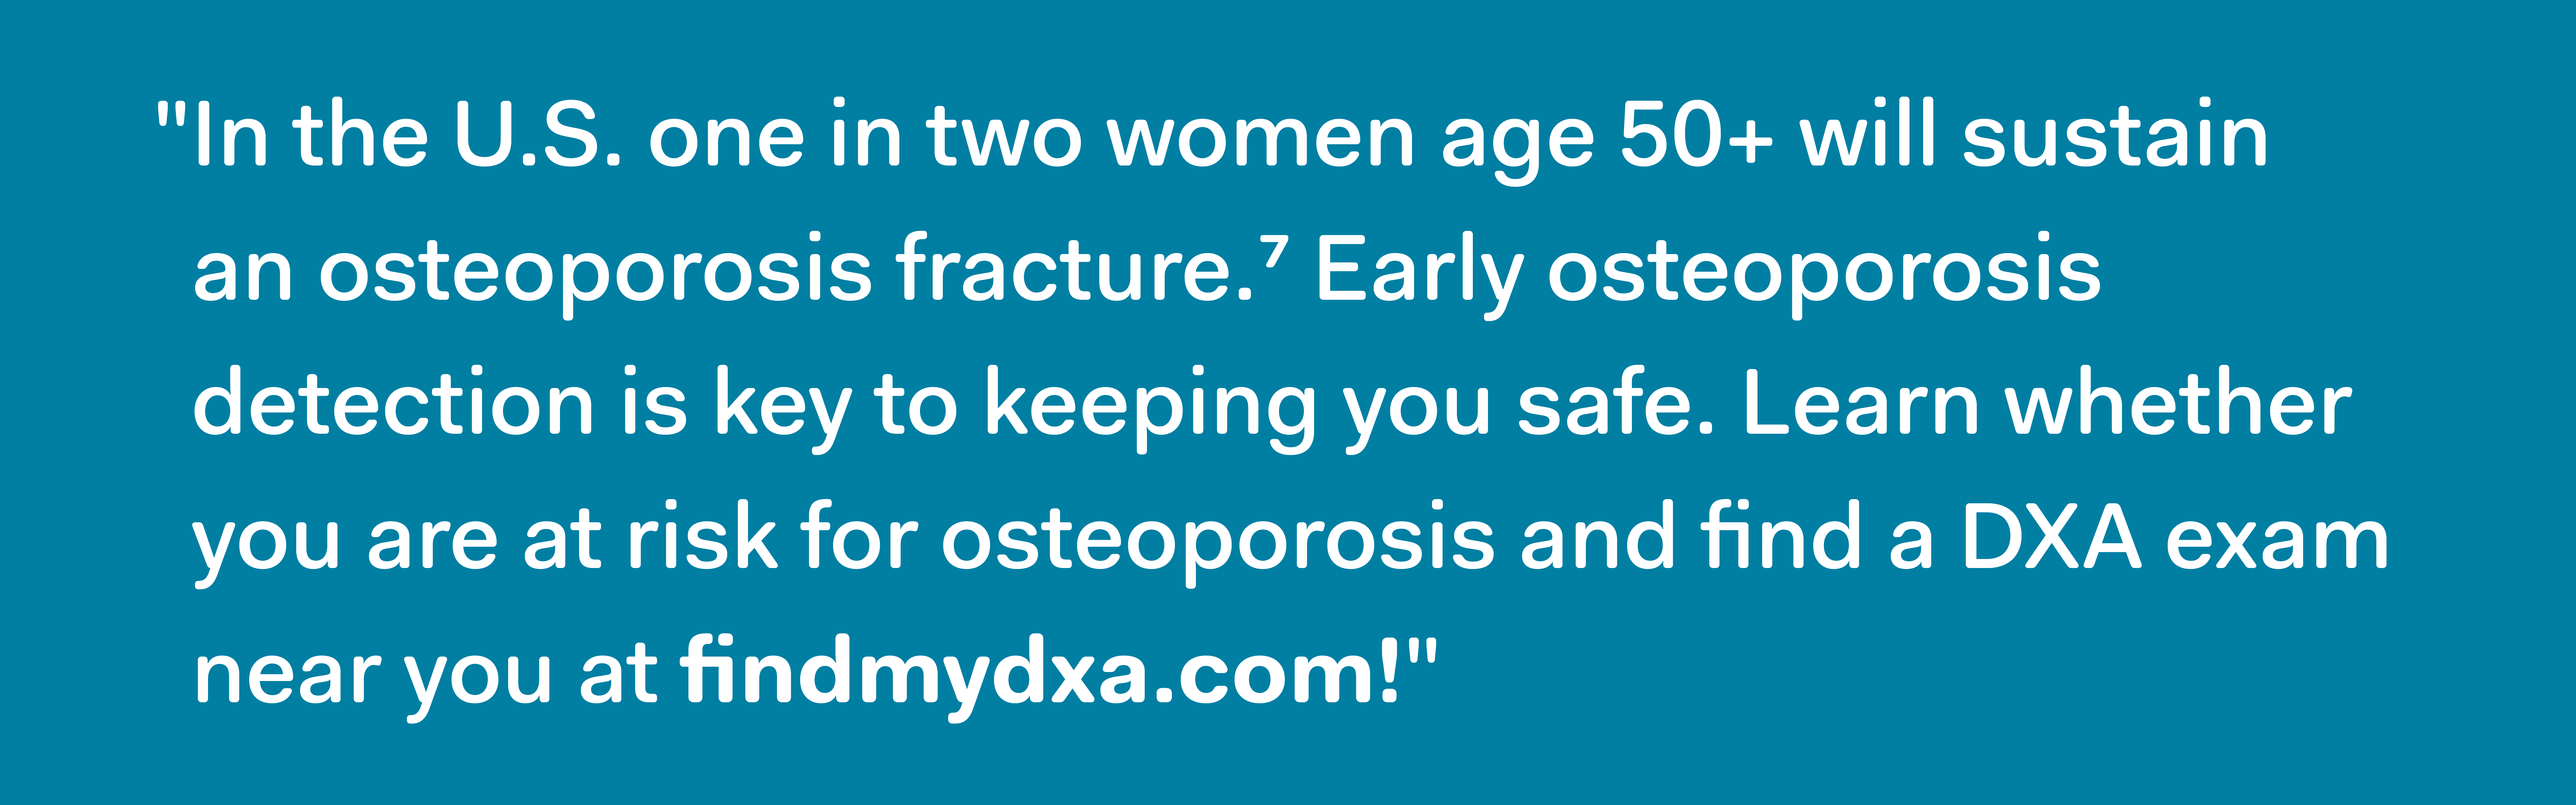 National Osteo pull quote